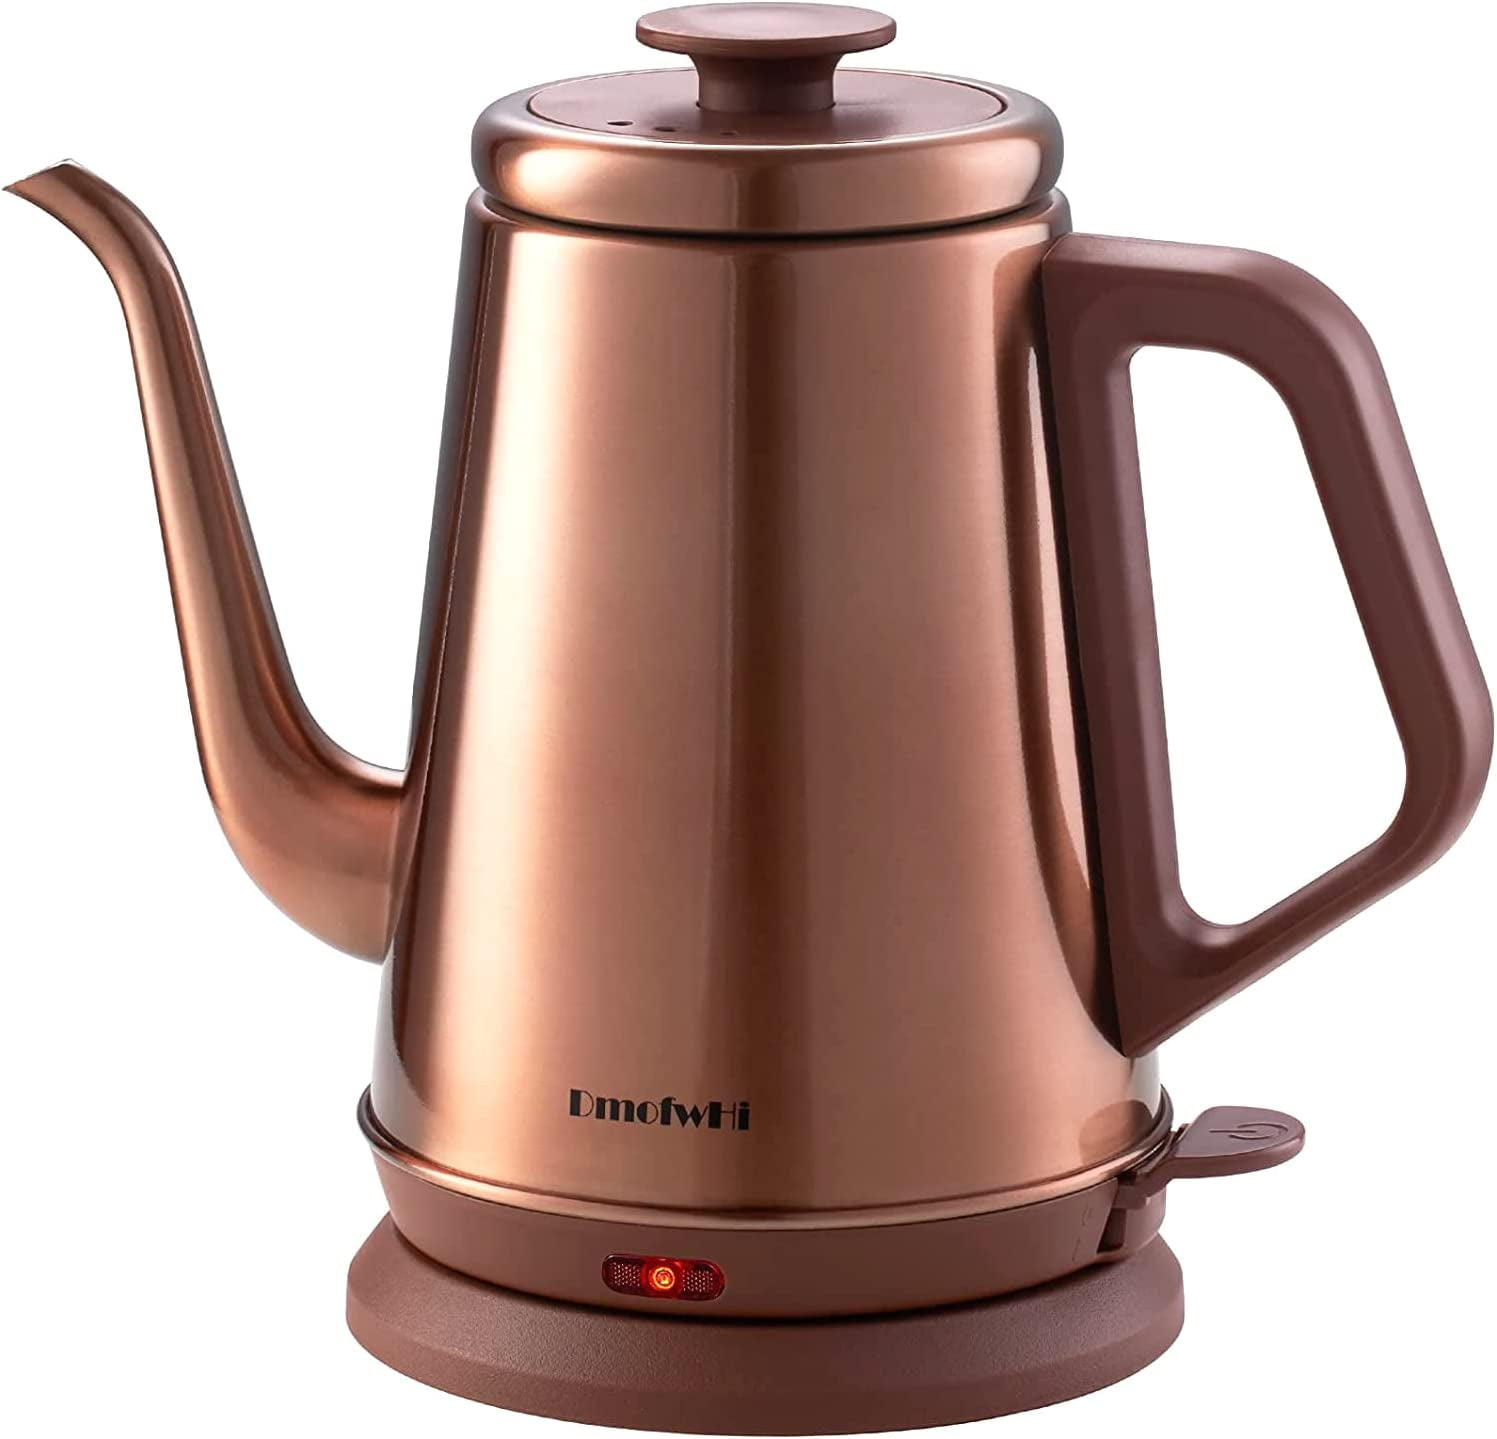 DmofwHi 1000W Gooseneck Electric Kettle (1.0L),100% Stainless Steel BPA  Free Tea Kettle with Auto Shut - Protection, Pour Over Coffee Kettle  -Copper 